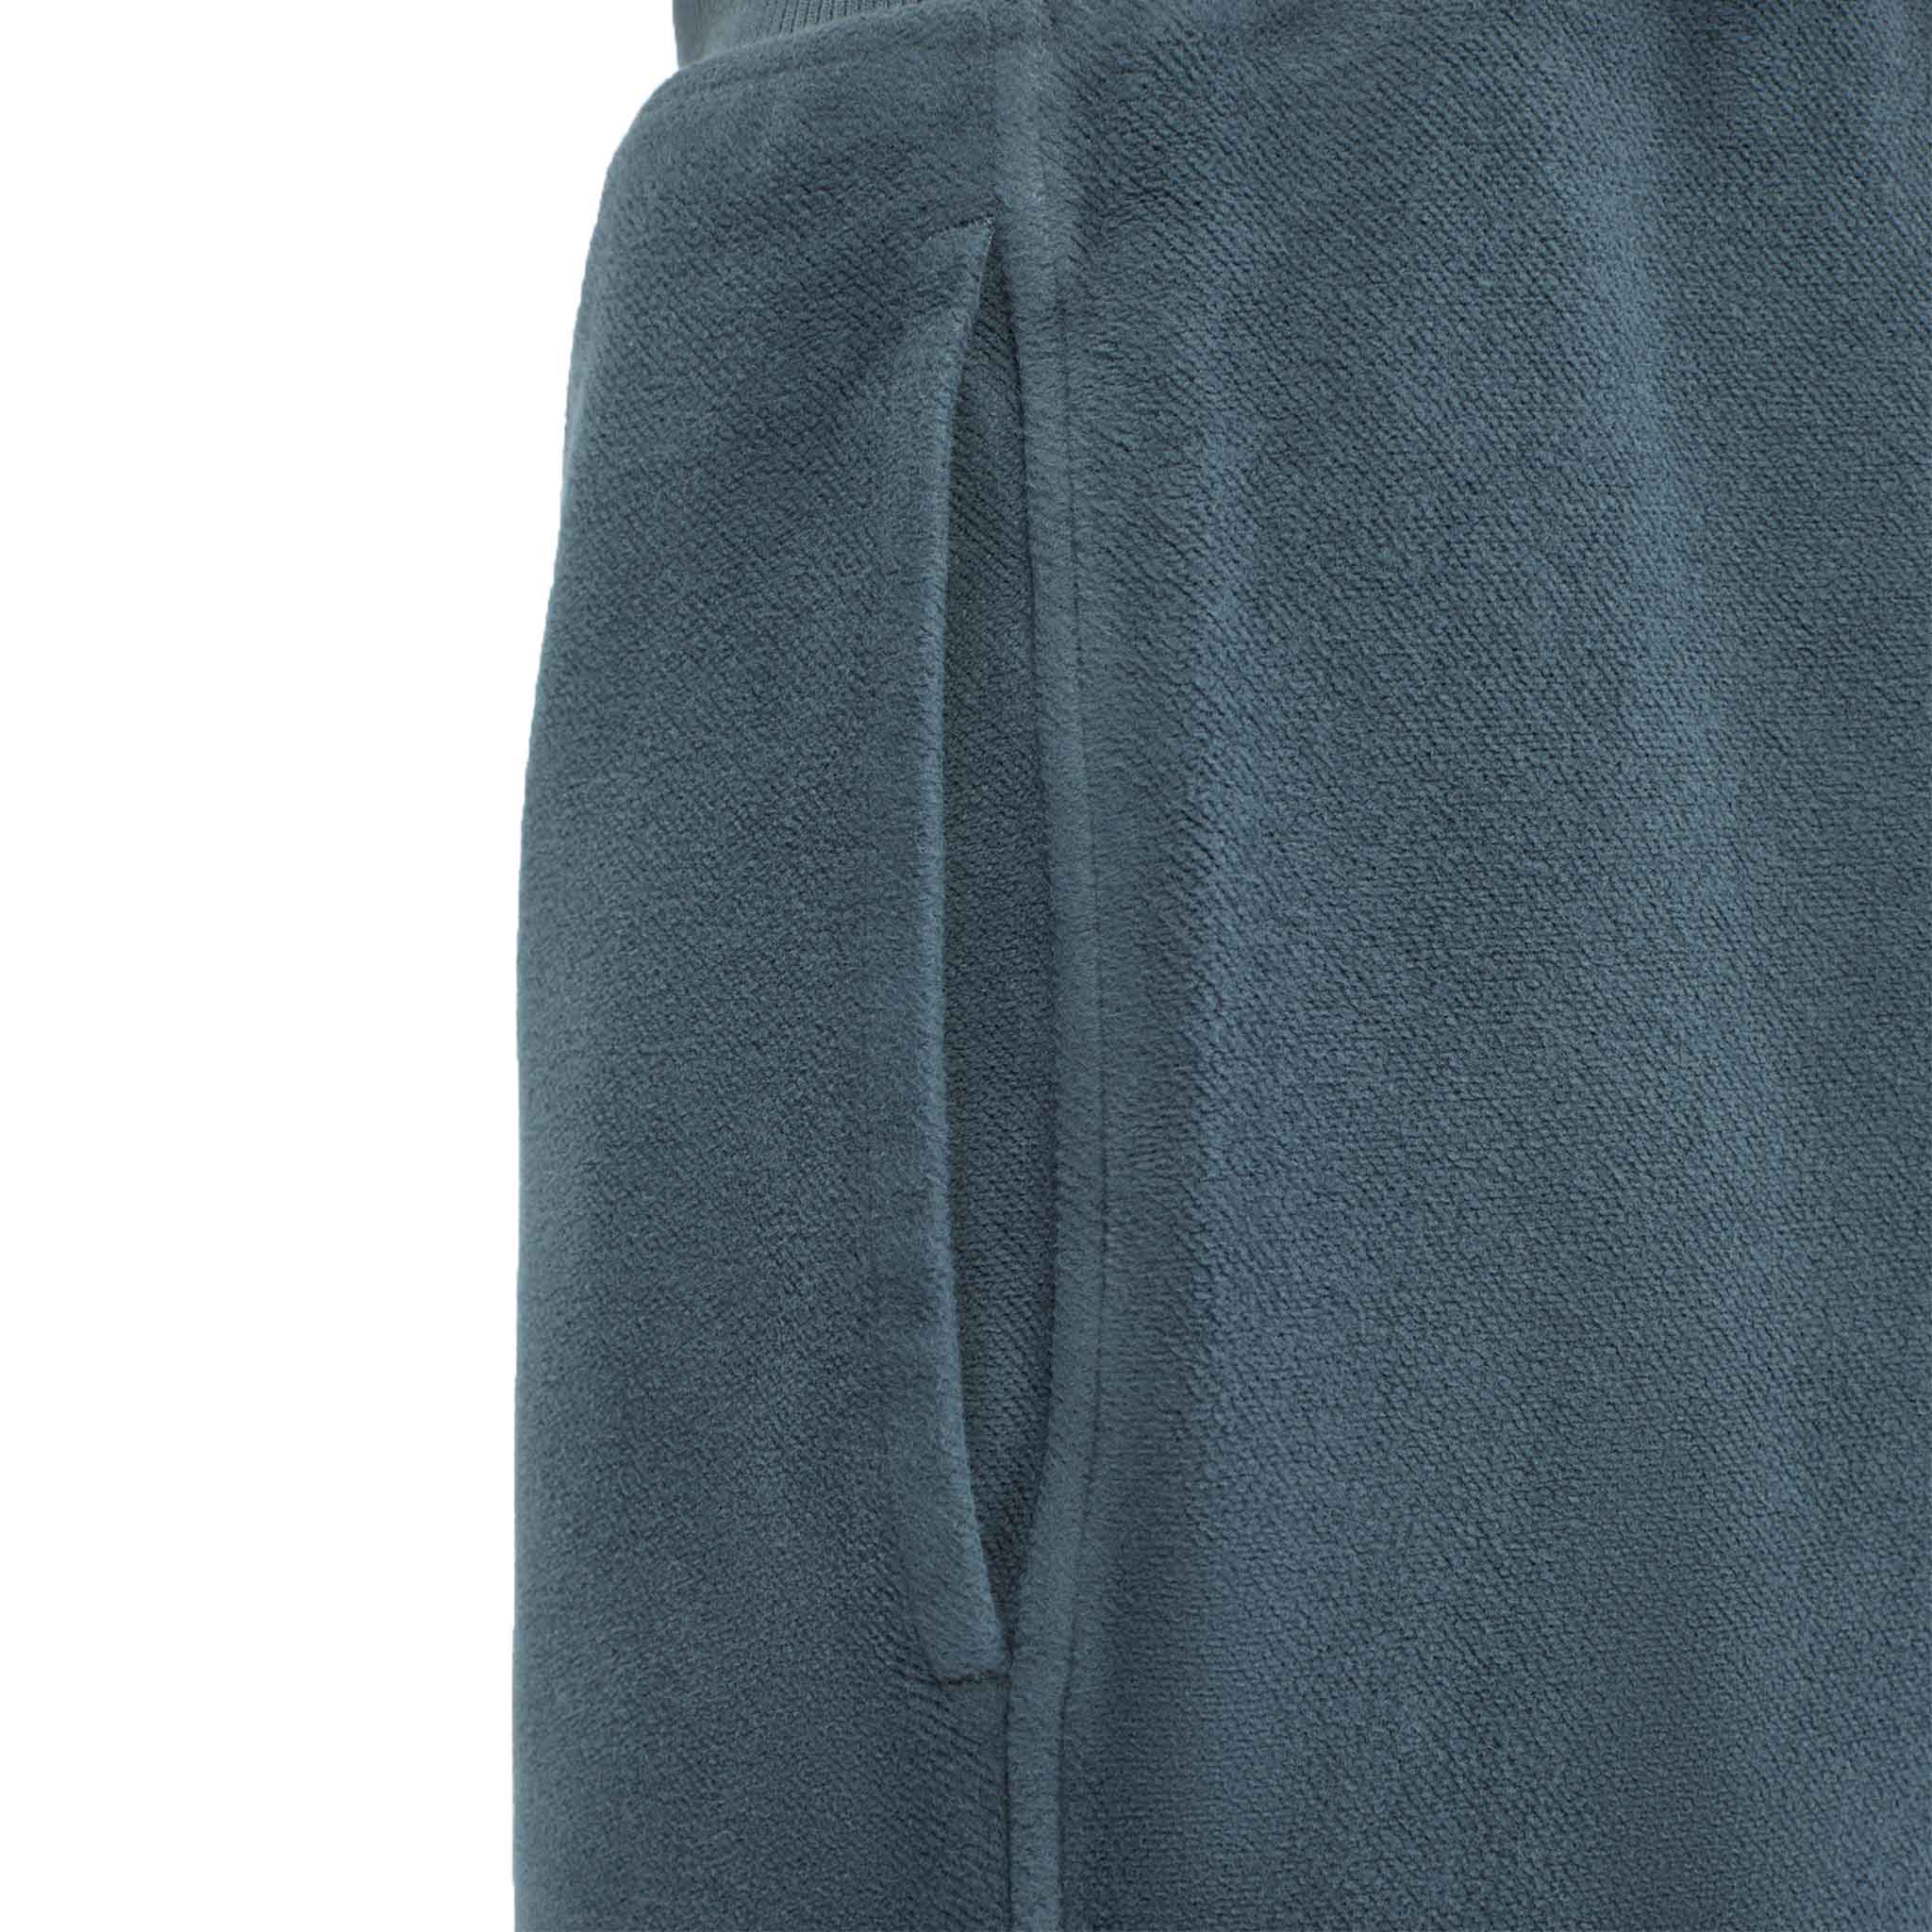 C.P. Company Reverse Brushed & Emerized Diag. Fleece Sweatpants in Orion Blue